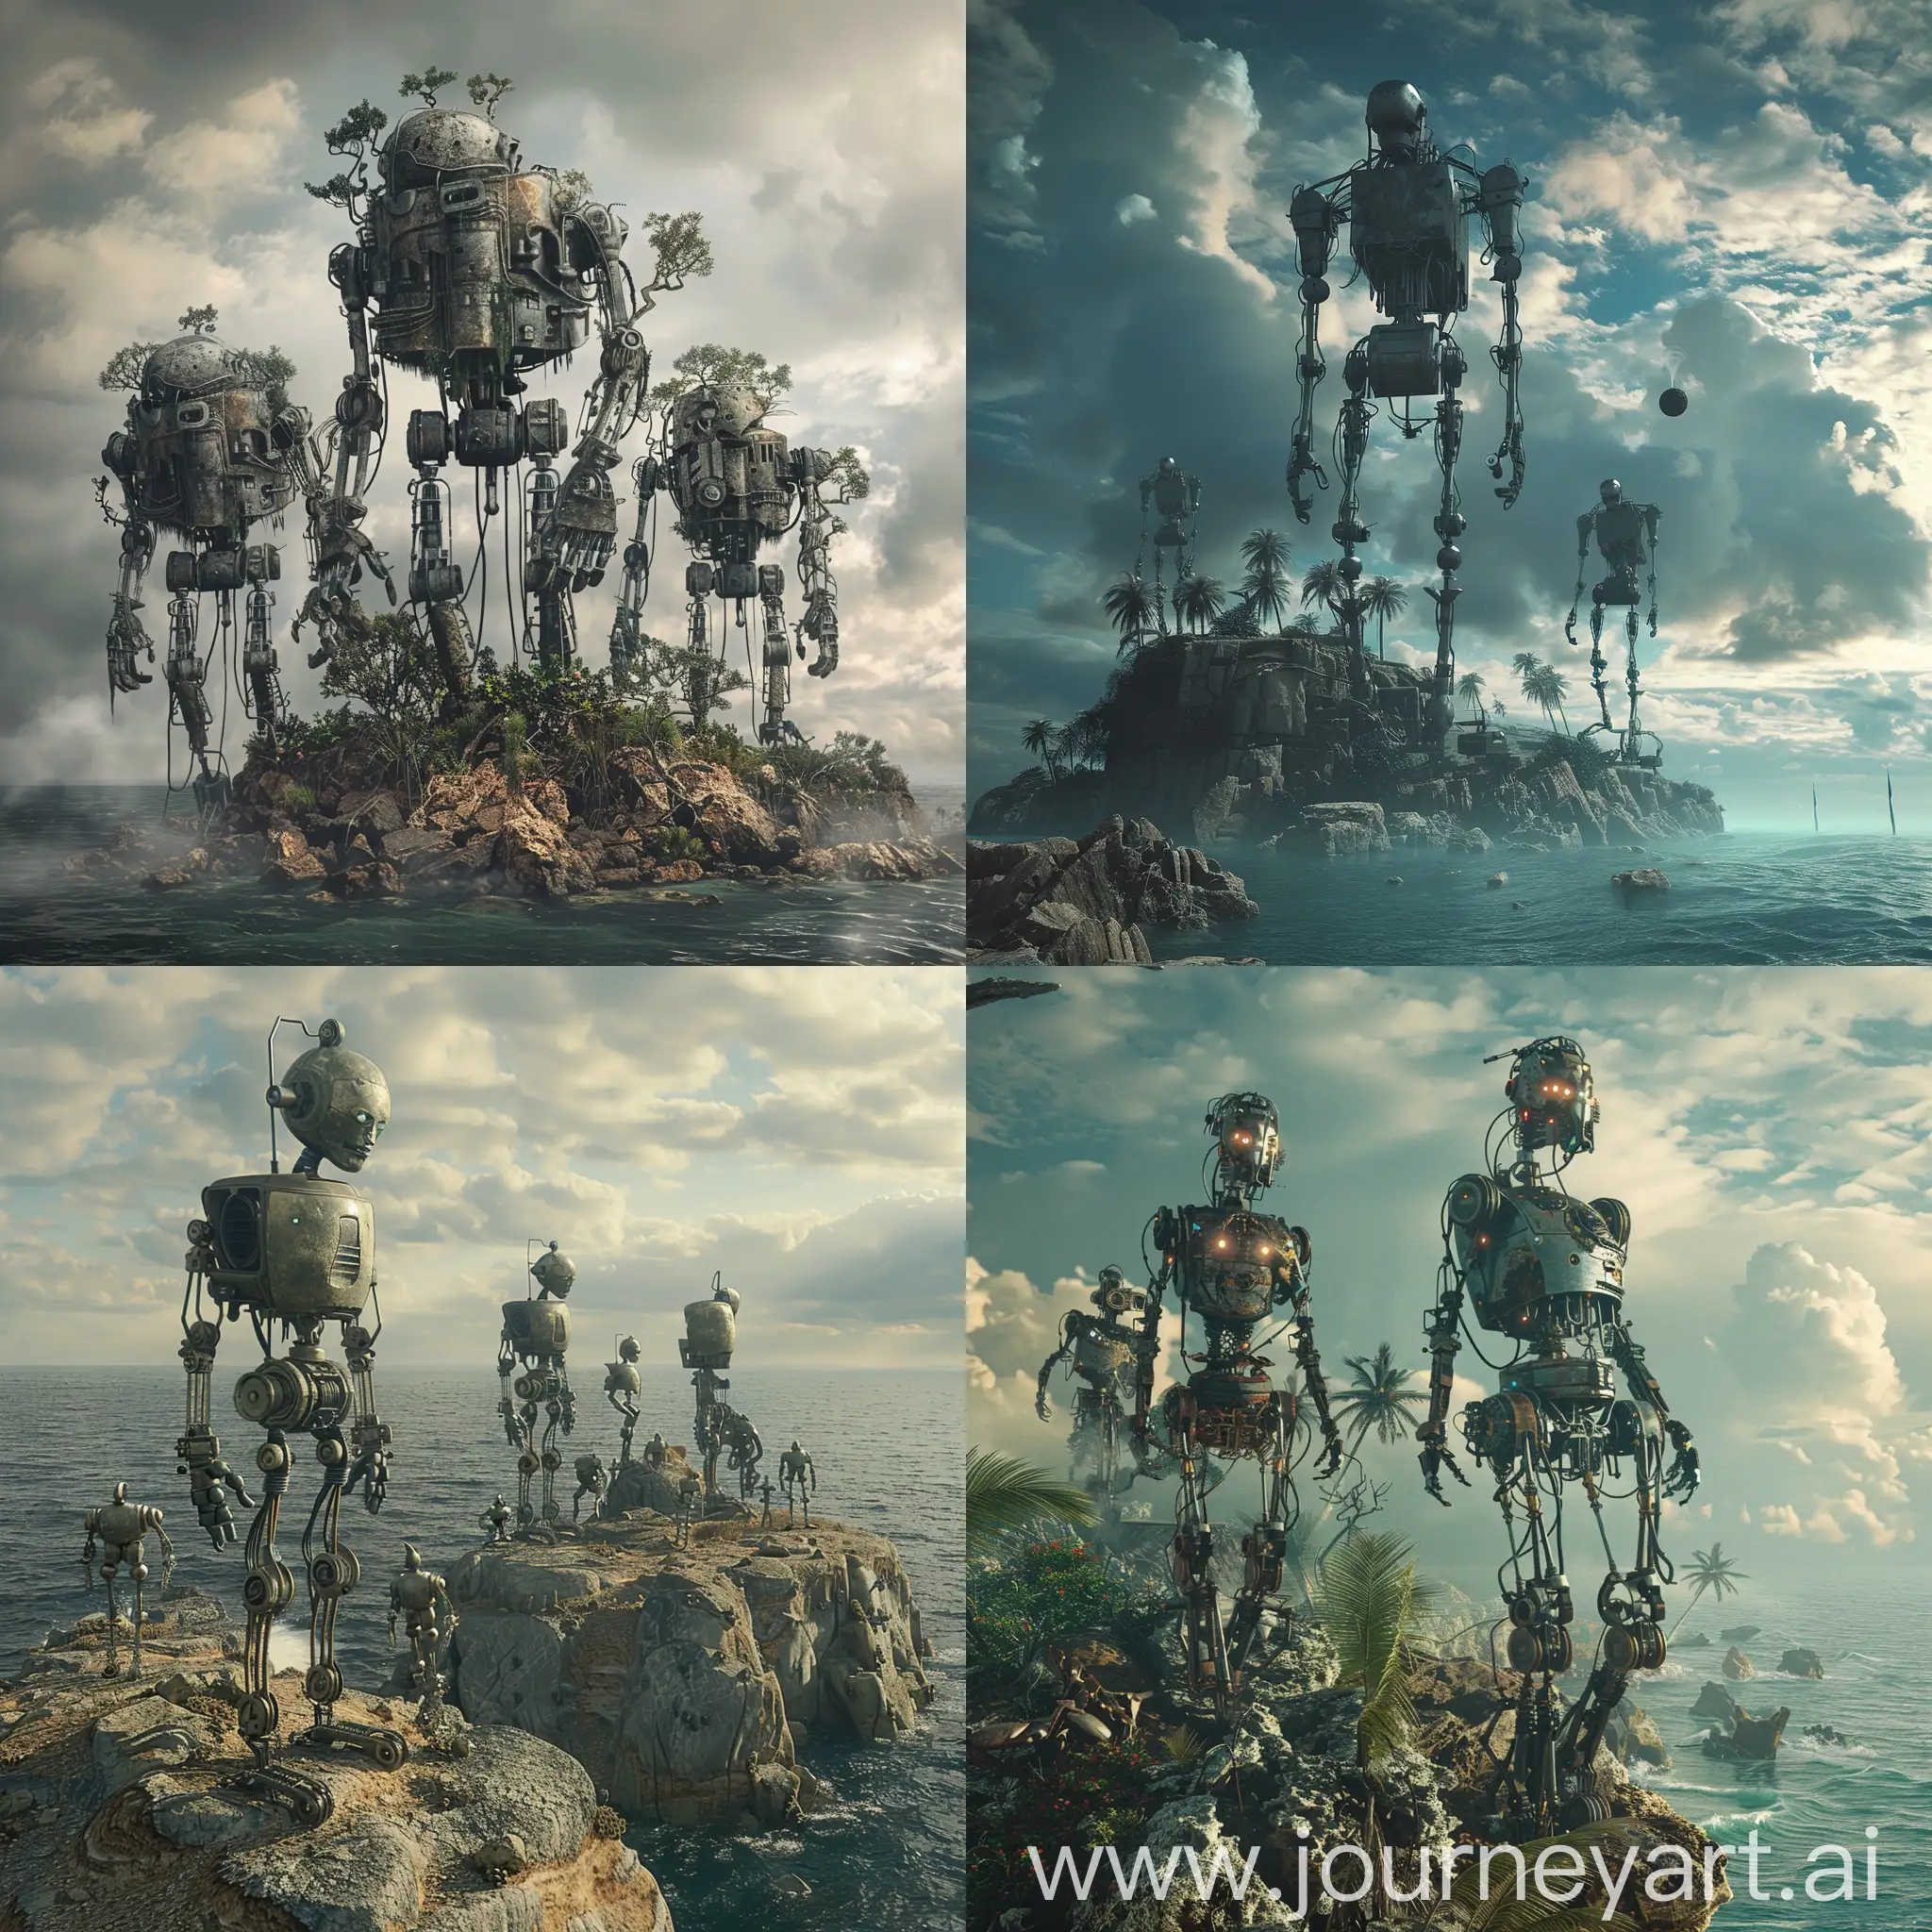 Robotic-Island-Alternate-Universe-with-Mechanical-Creatures